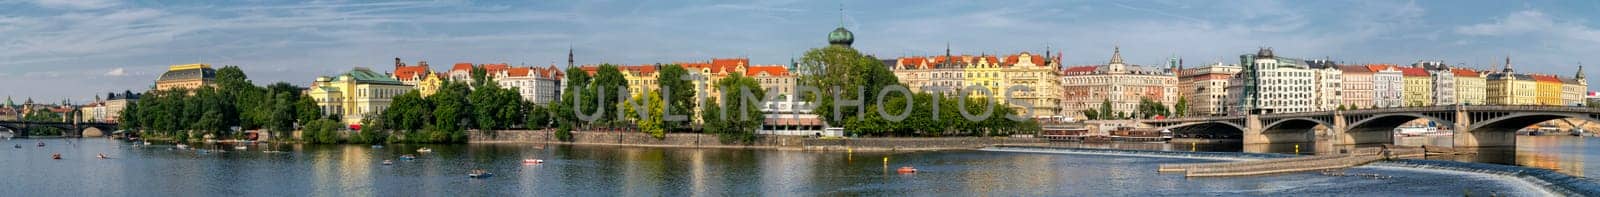 Prague view panorama cityscape from moldova river by AndreaIzzotti